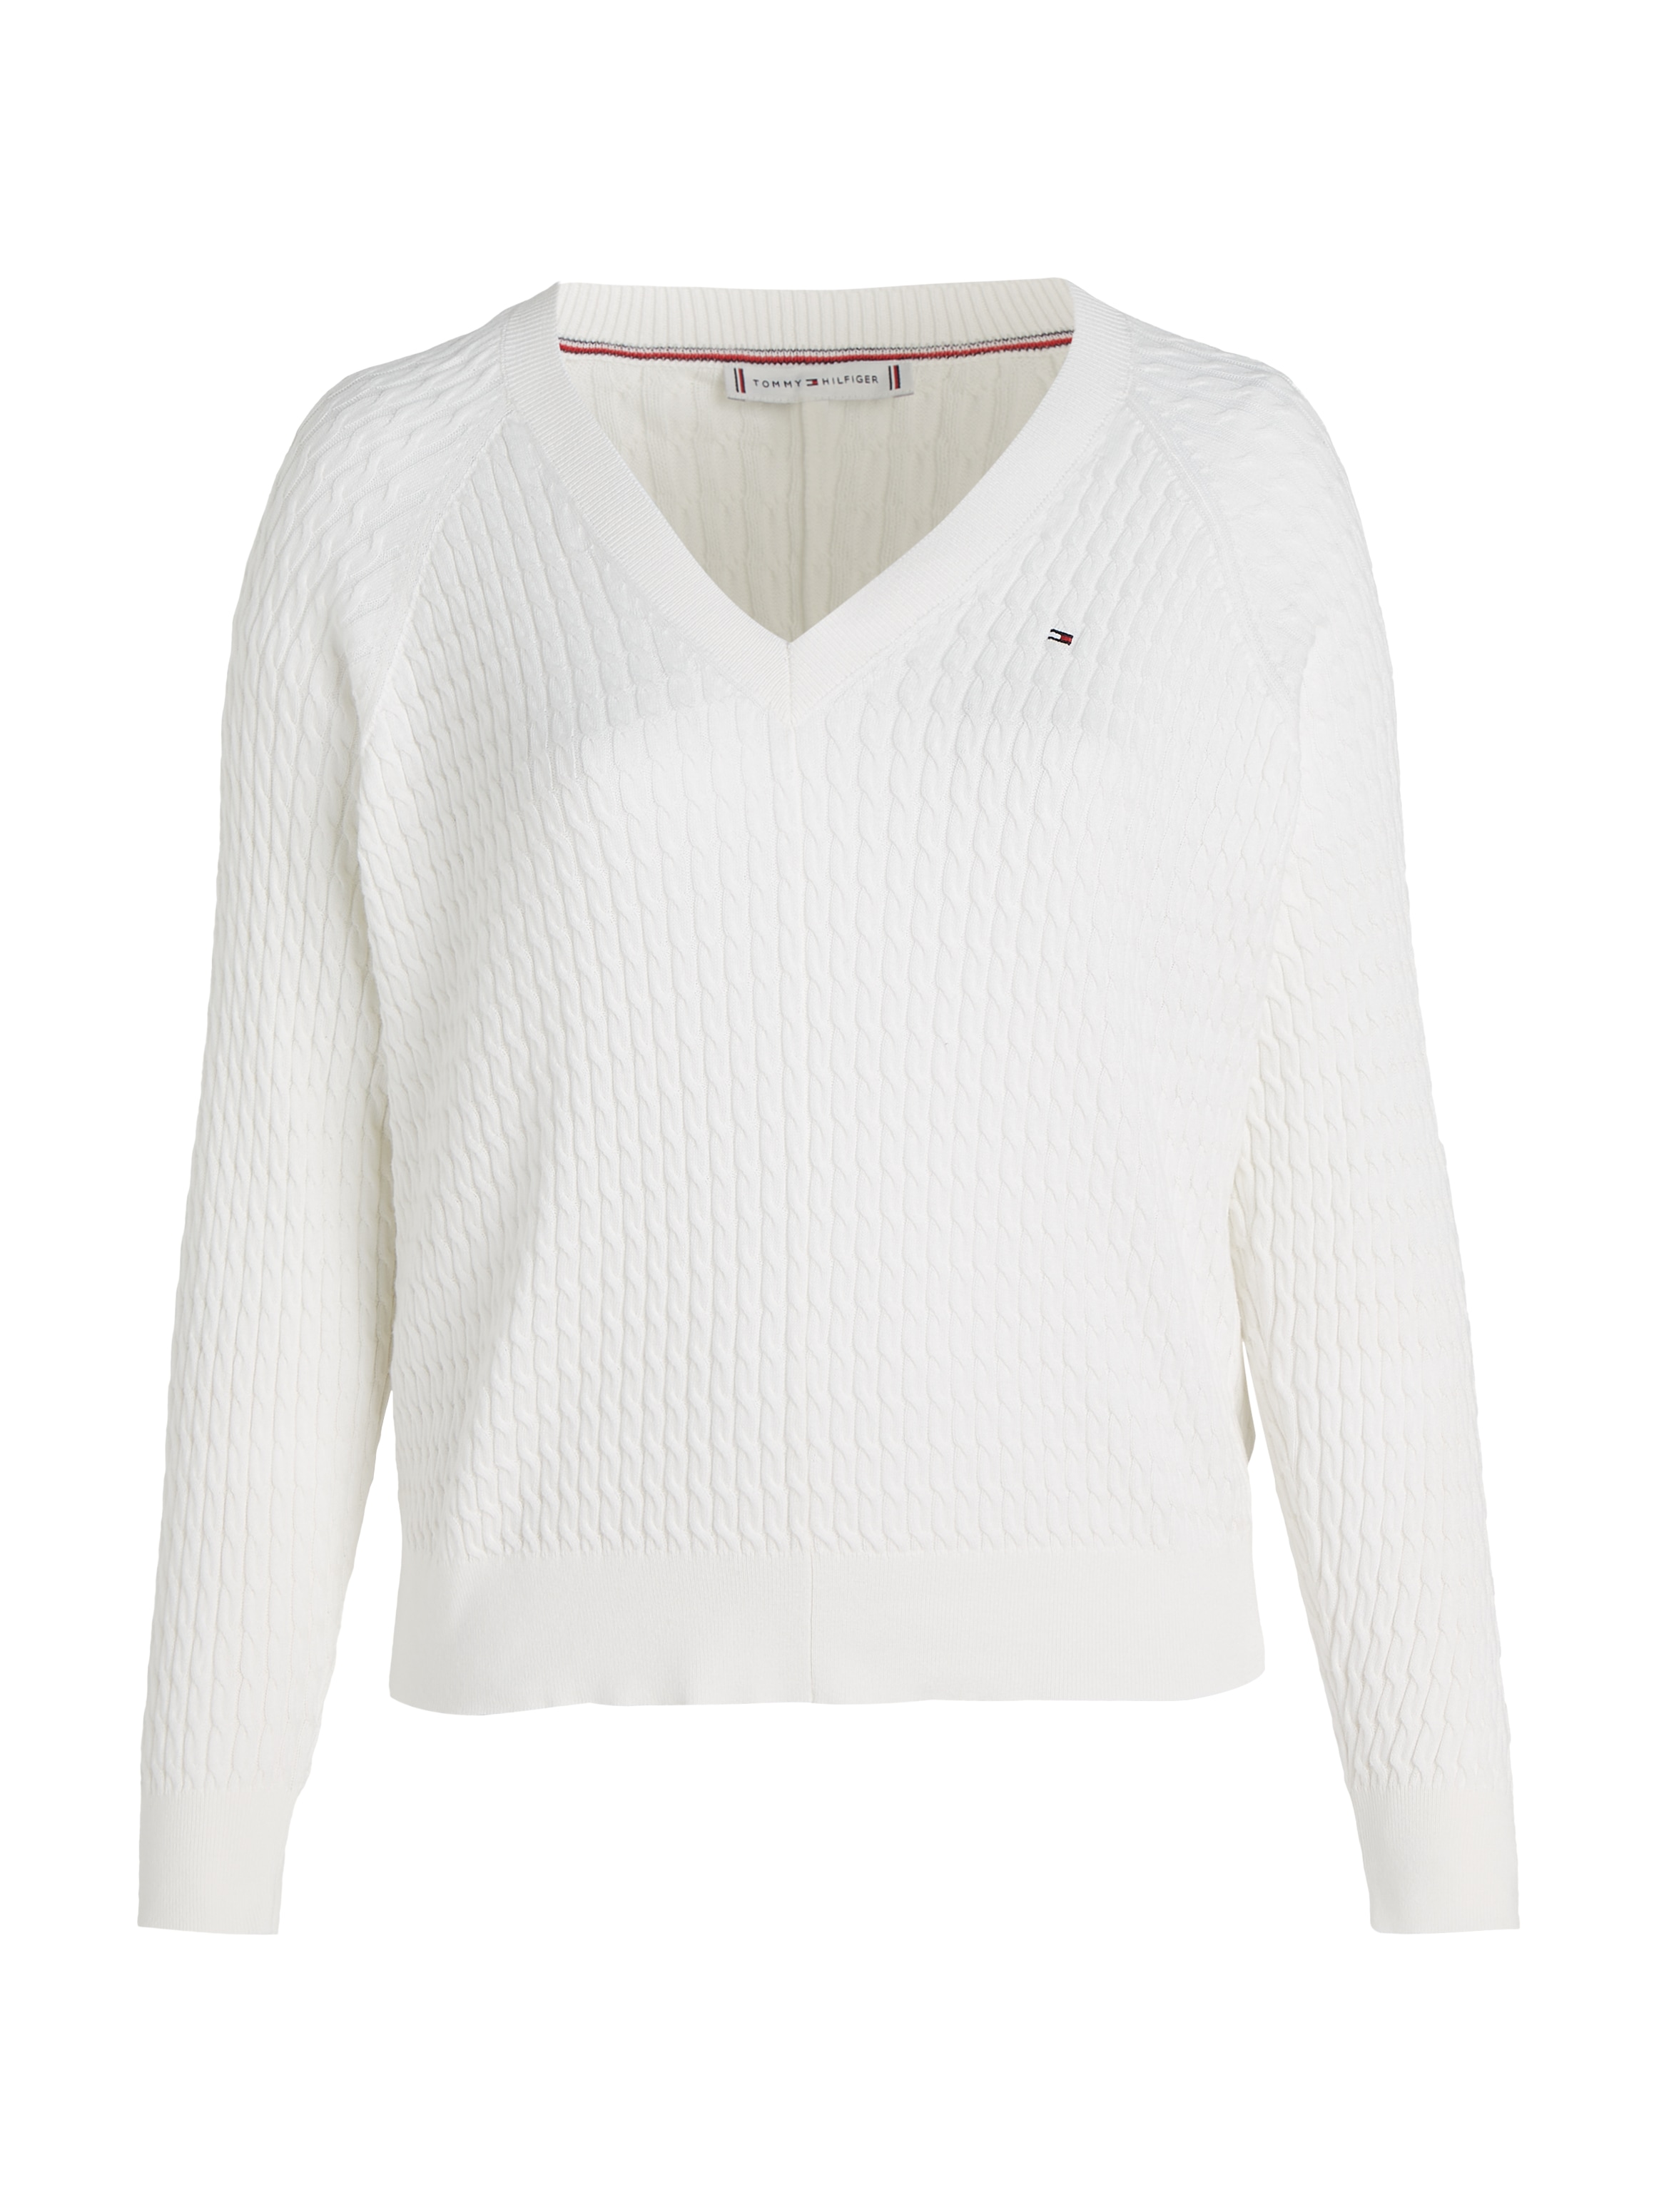 Tommy Hilfiger Curve V-Ausschnitt-Pullover »CRV Logostickerei CABLE CO V-NK OTTO mit SWEATER«, online bei